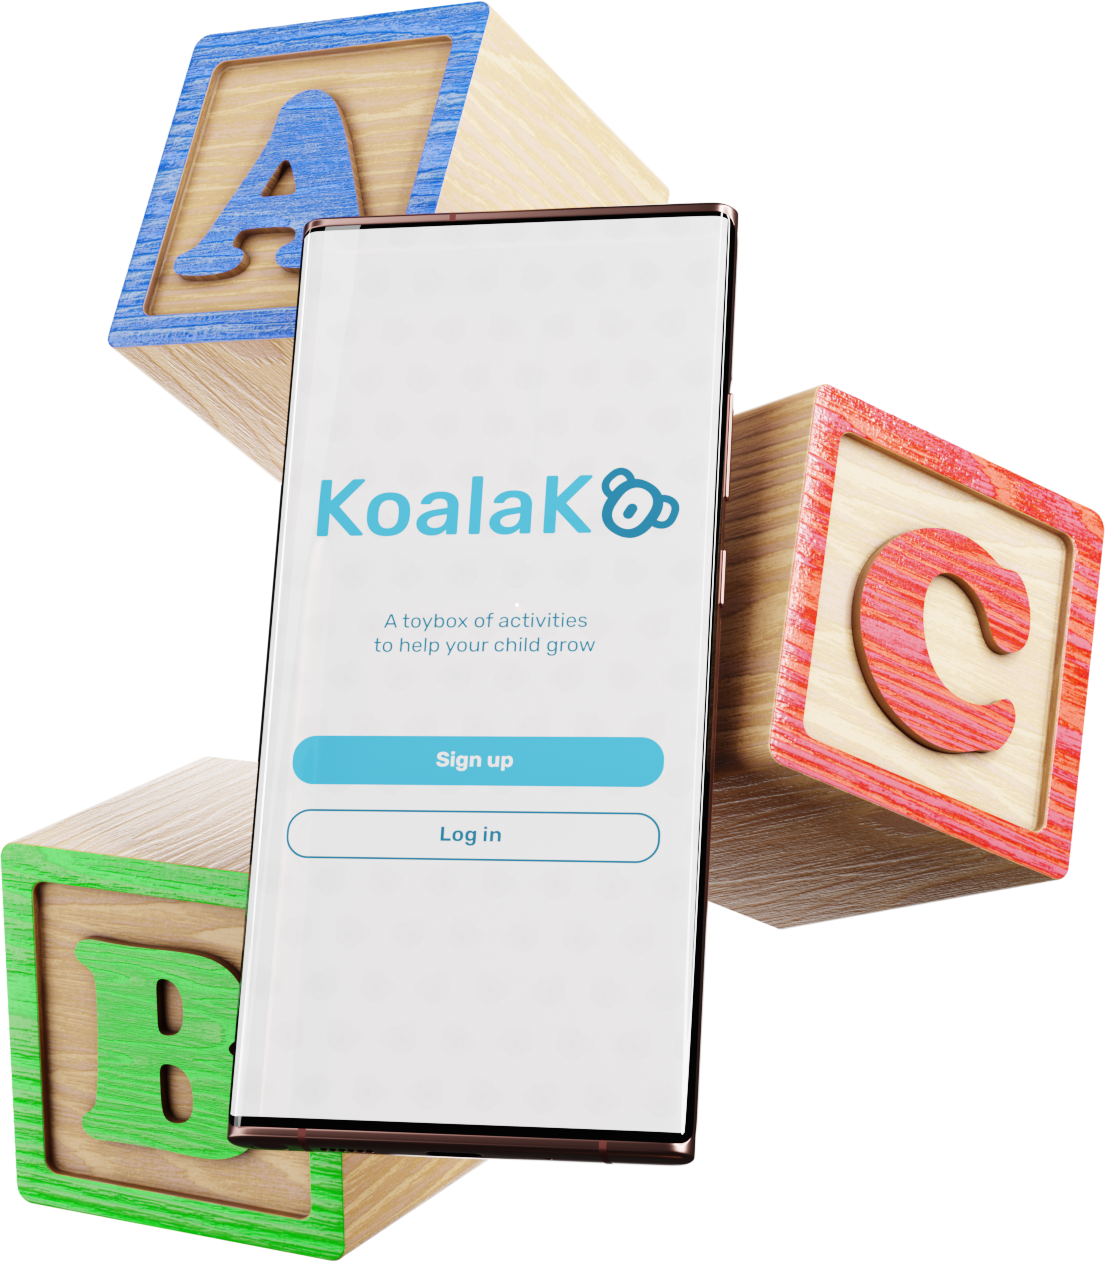 3D rendering of a phone with an app called 'KoalaKo' open on the screen